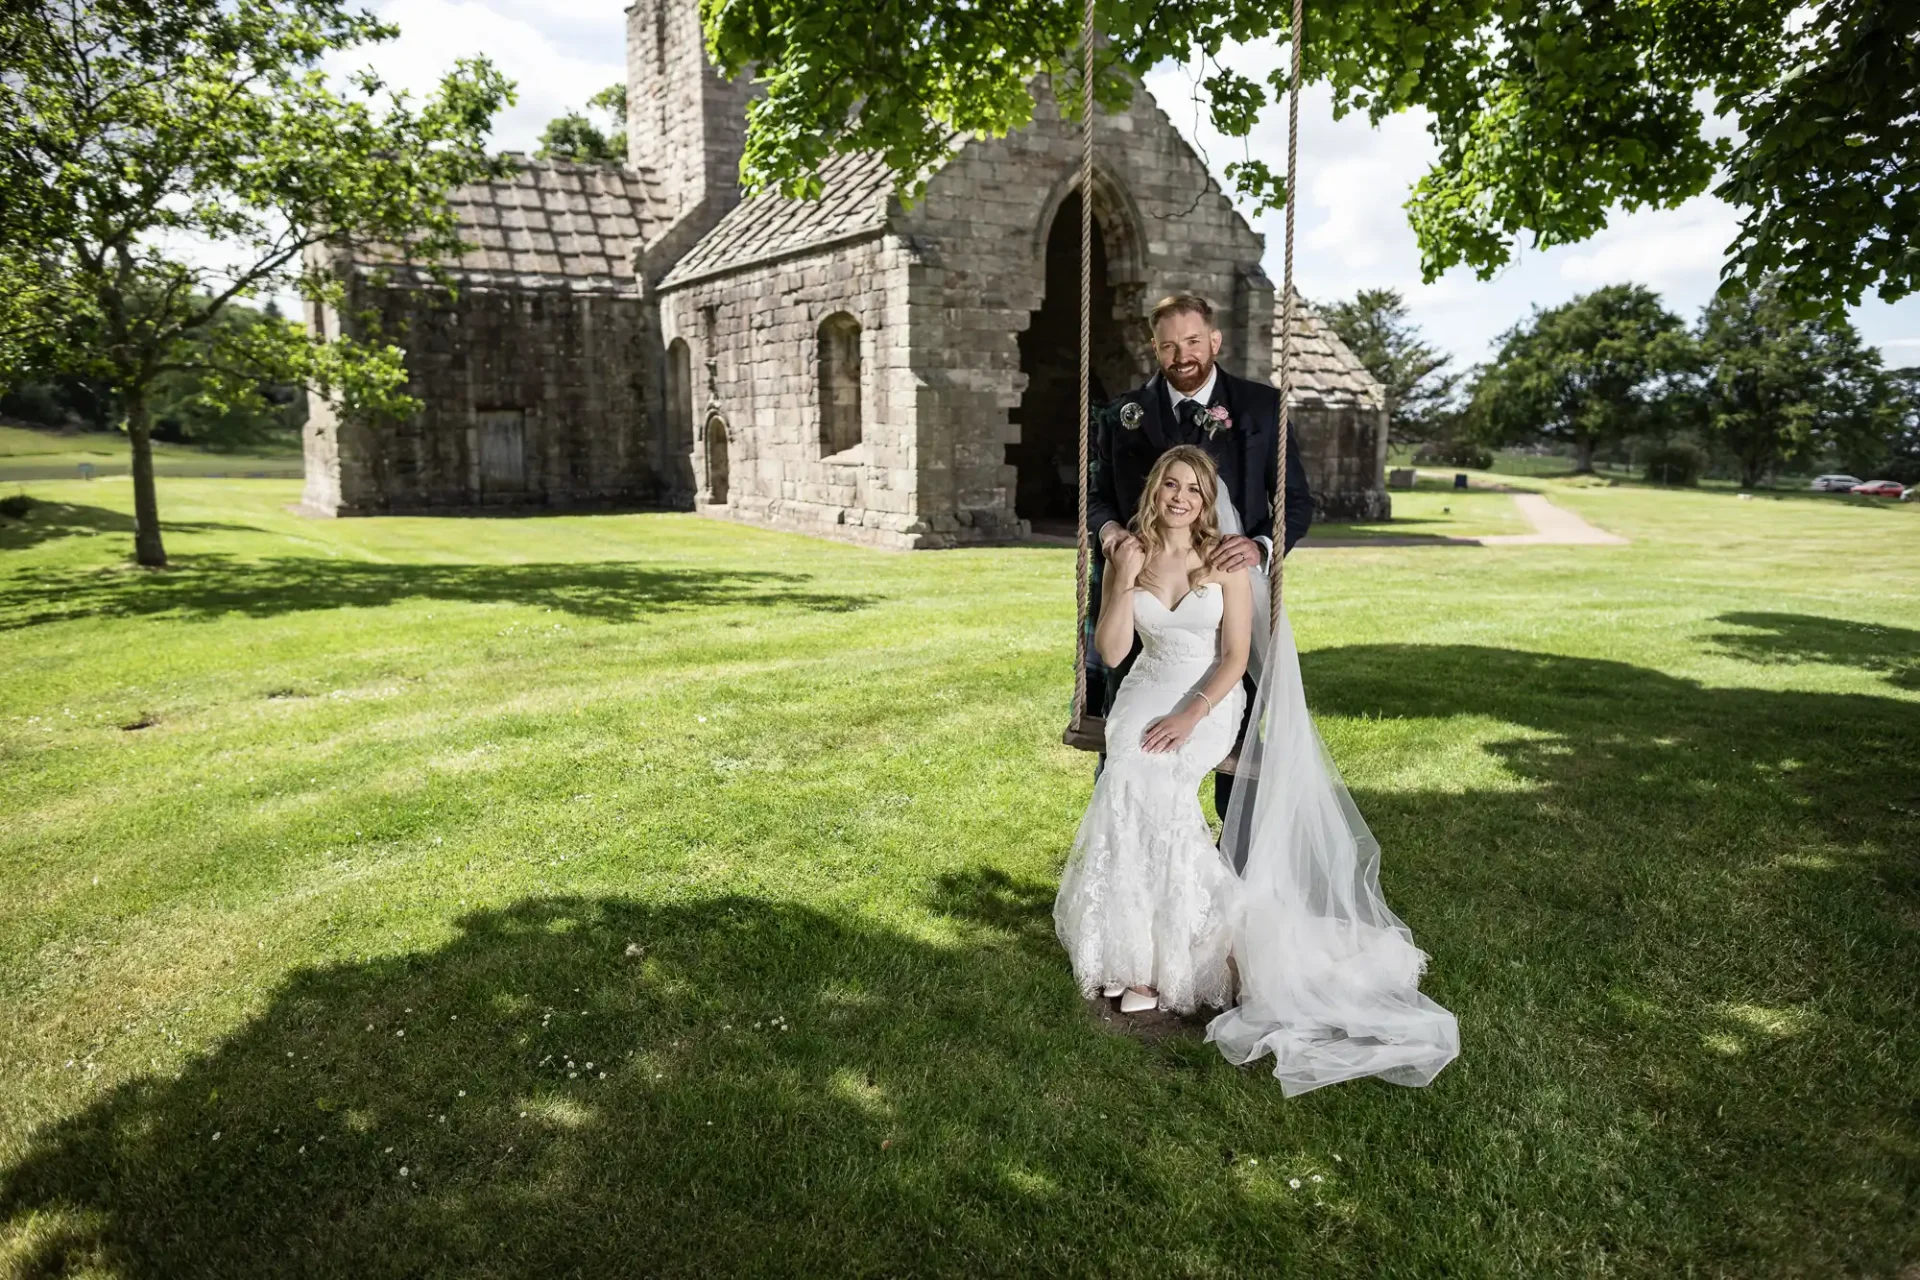 A bride and groom smiling under a tree, near a historic stone church on a sunny day with a clear blue sky and lush green grass.